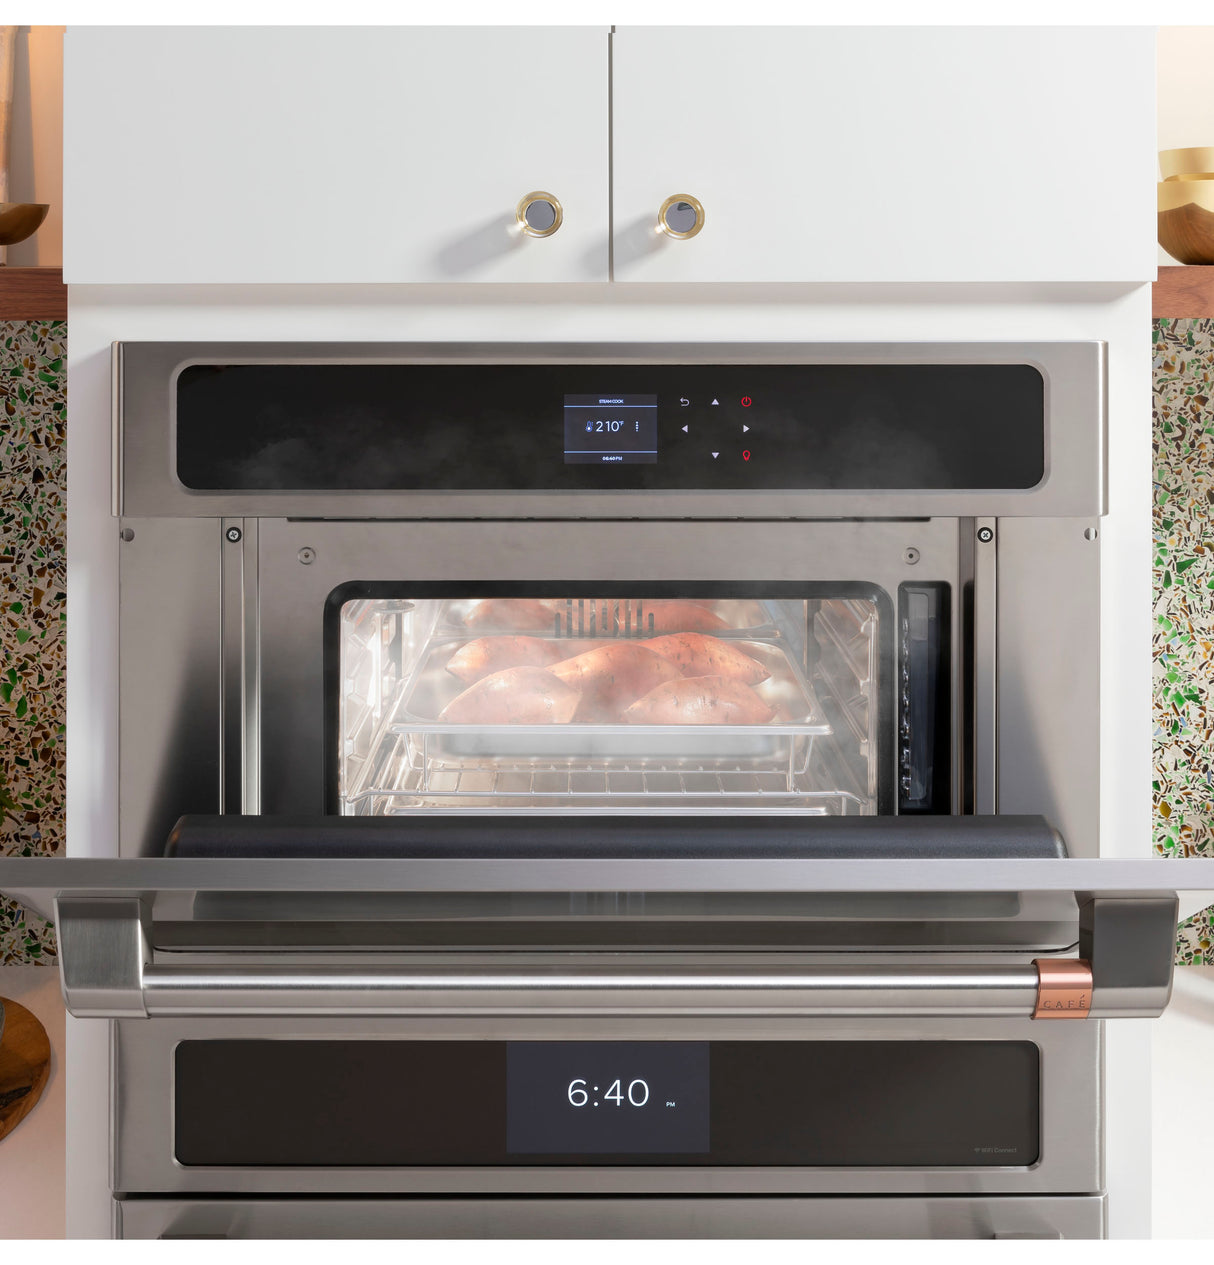 Caf(eback)(TM) 30" Pro Convection Steam Oven - (CMB903P2NS1)